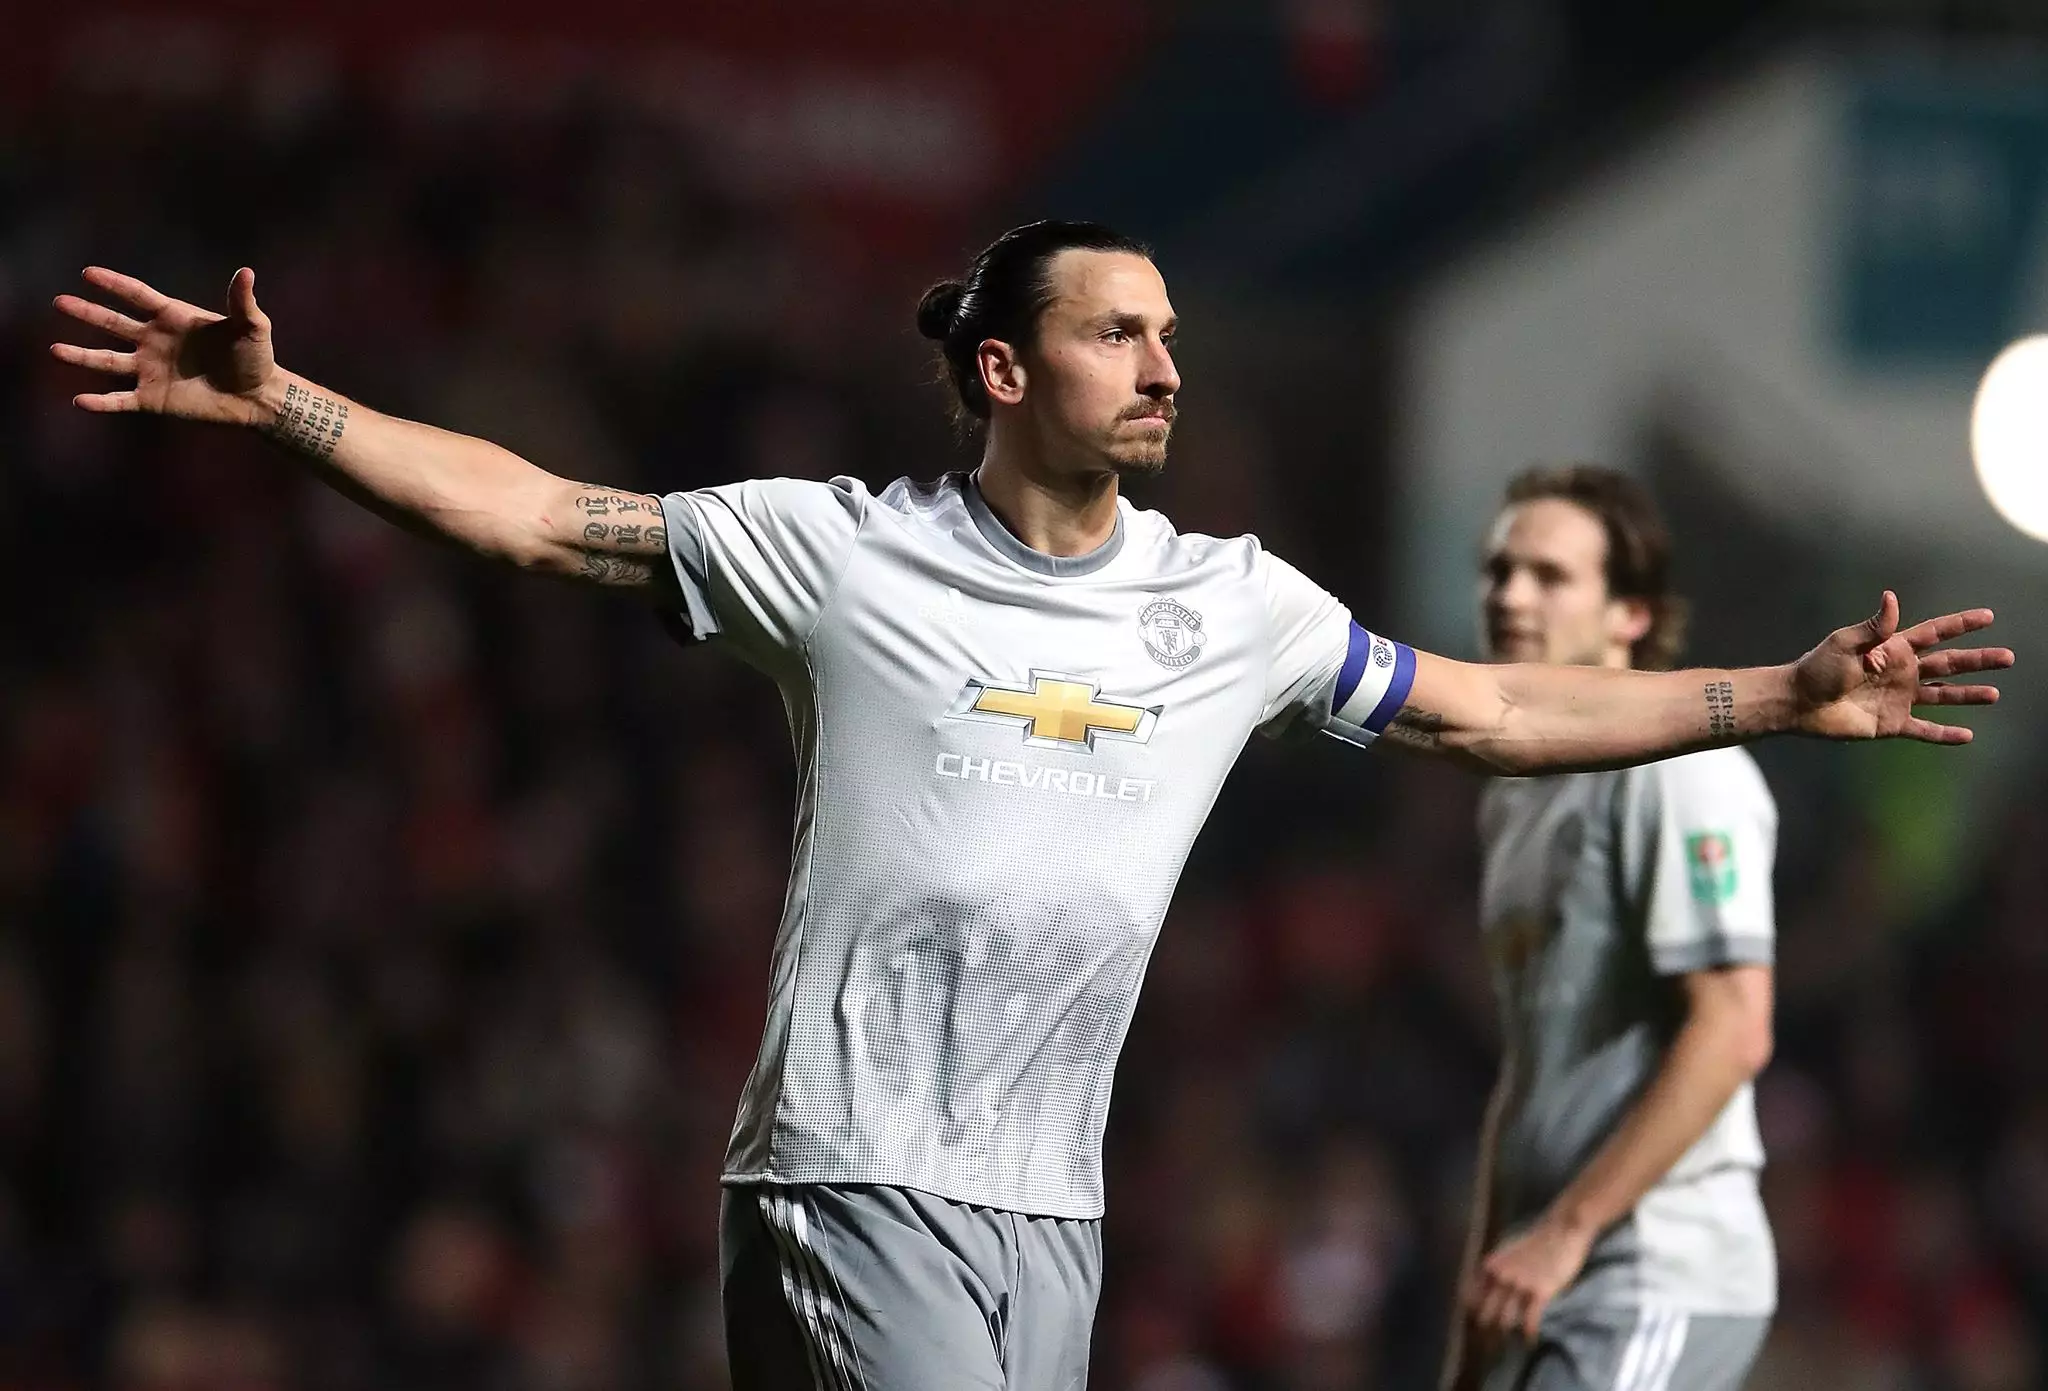 Ibrahimovic celebrates scoring his only goal of the campaign. Image: PA